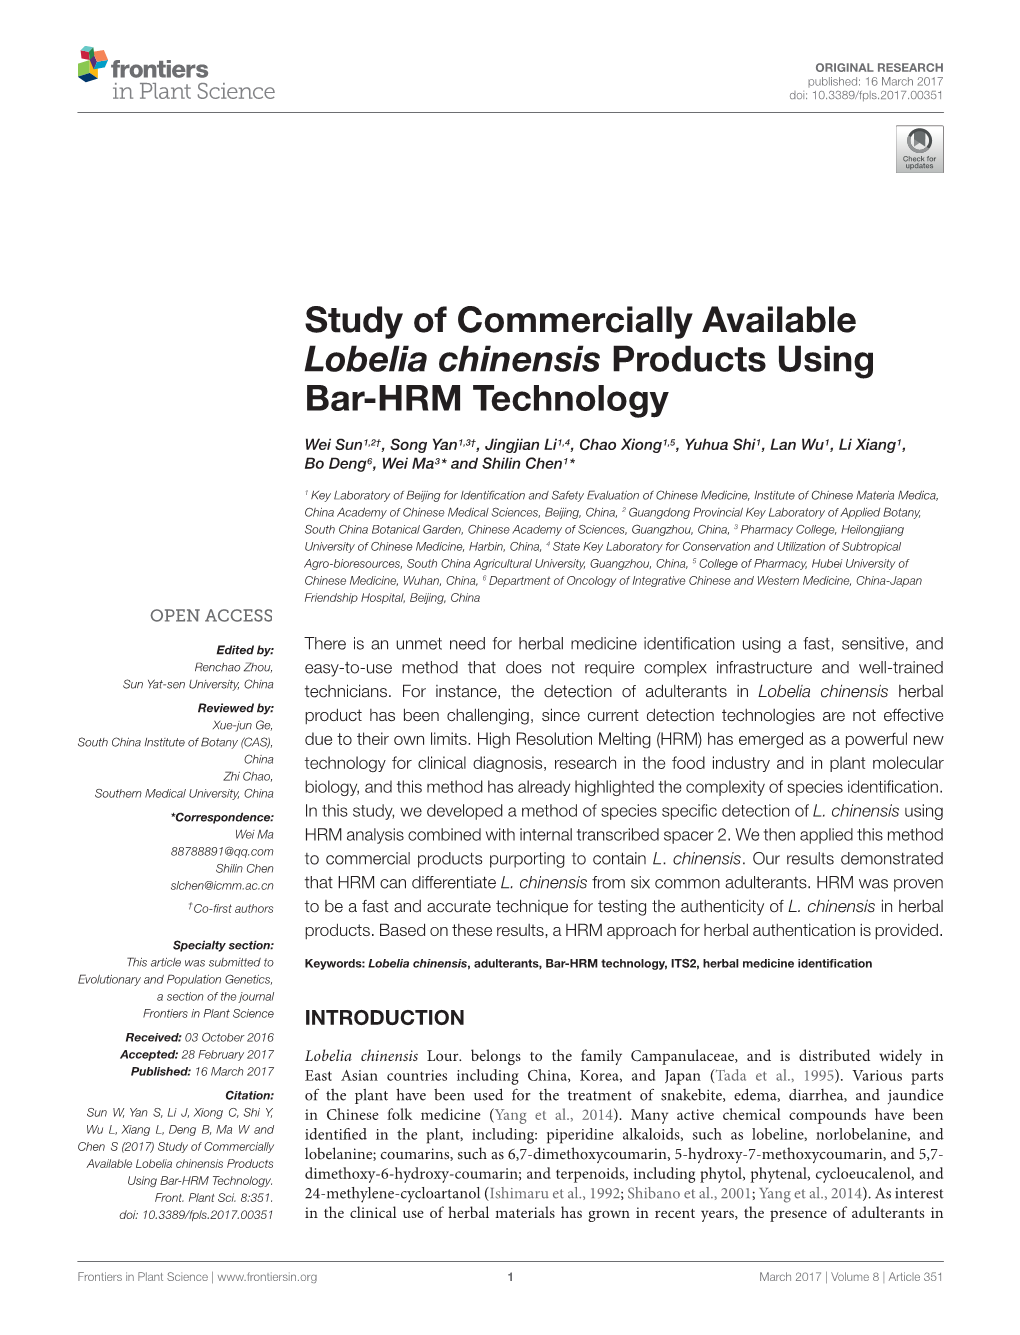 Study of Commercially Available Lobelia Chinensis Products Using Bar-HRM Technology